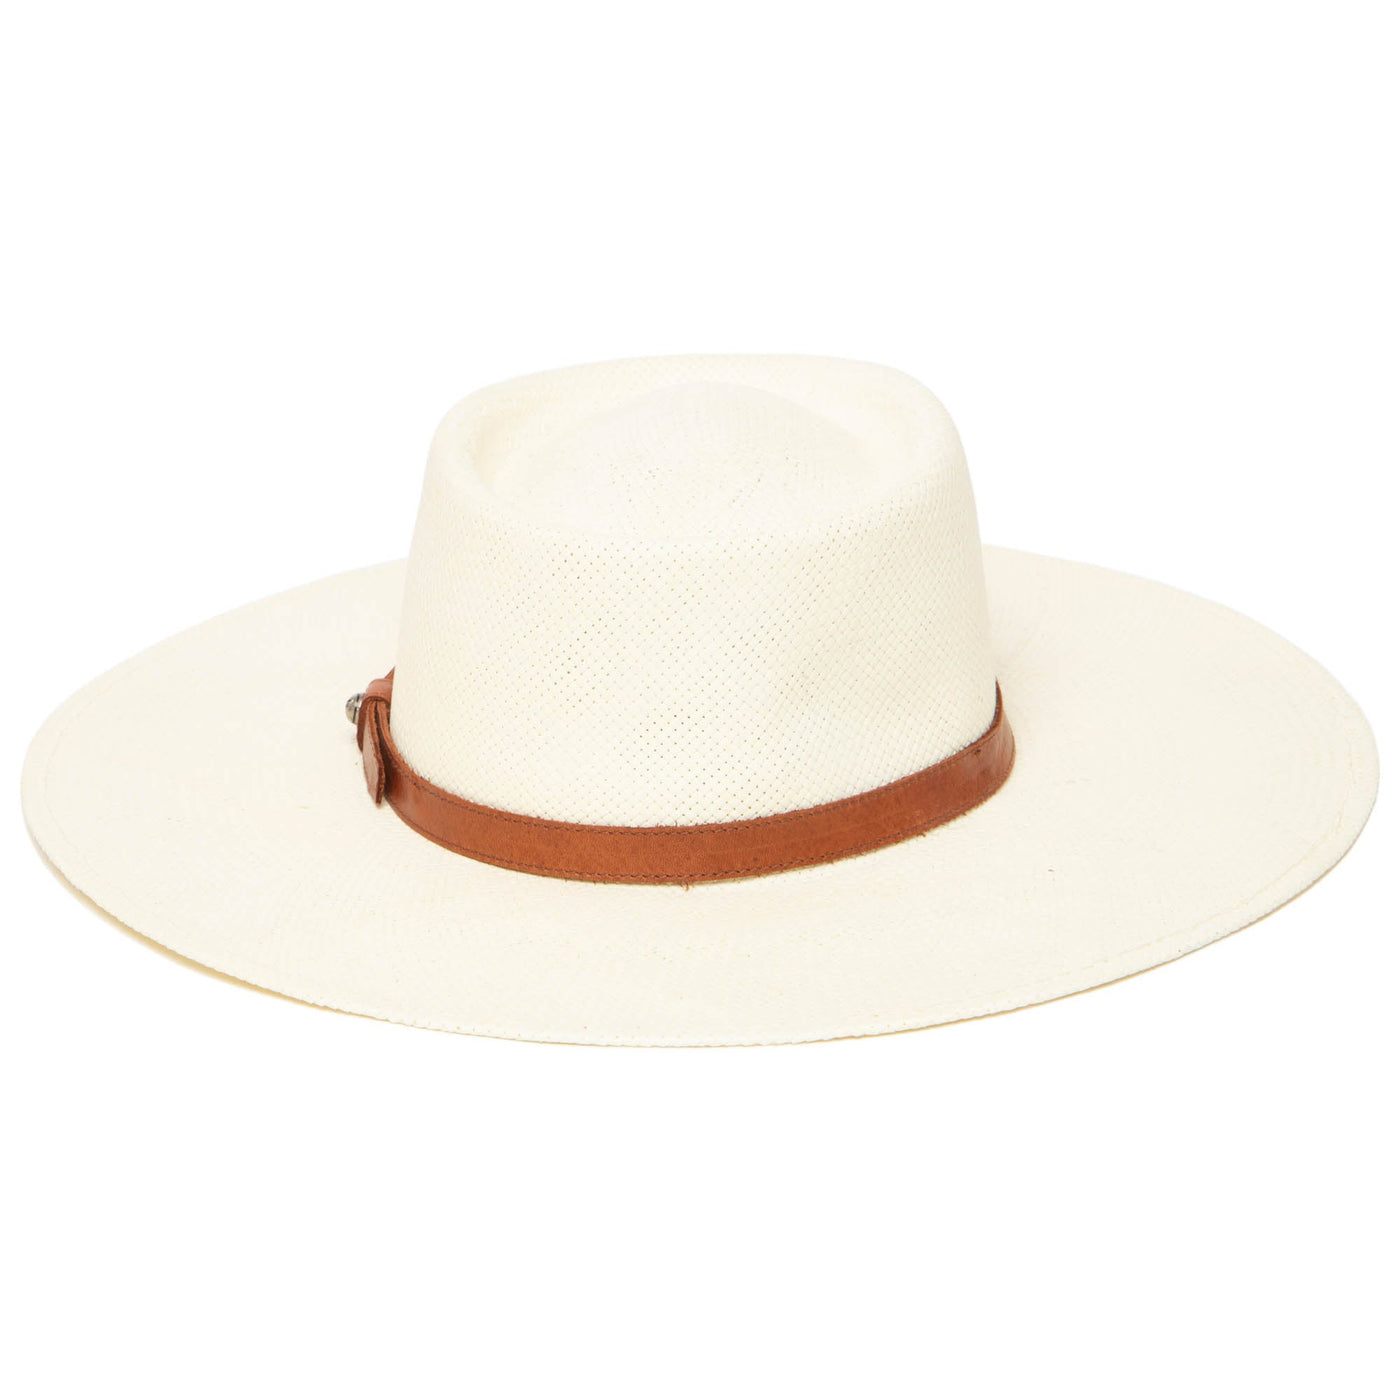 Barcelona Boater by FRYE - FPWSH006-BOATER-San Diego Hat Company